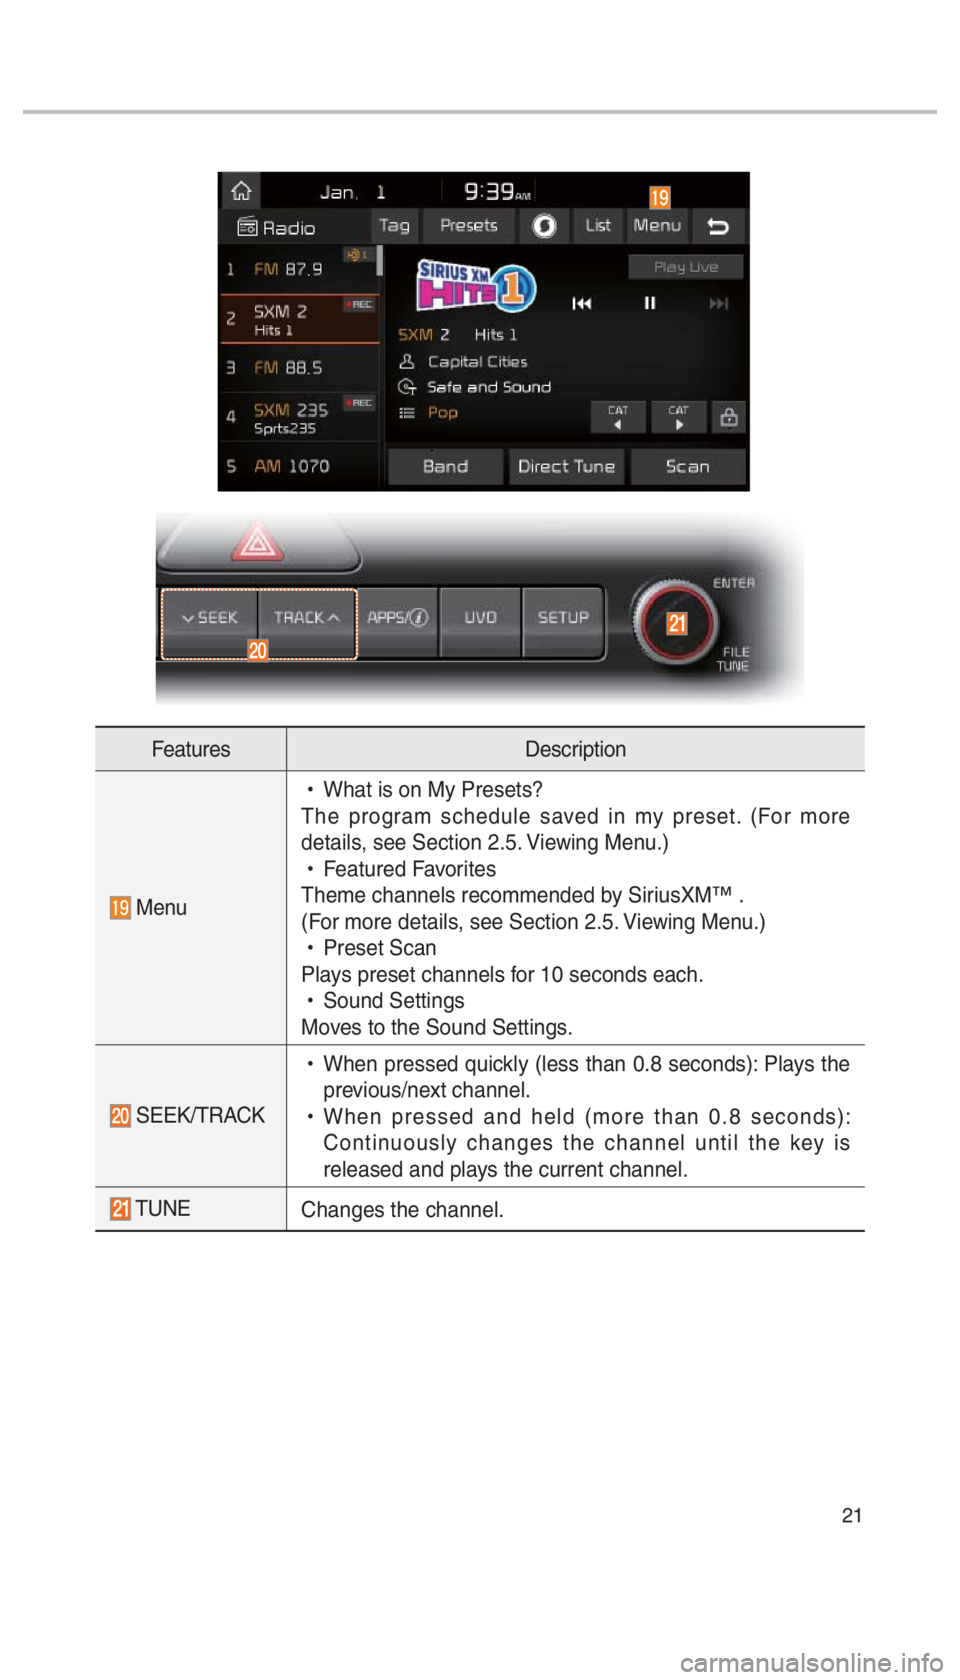 KIA SPORTAGE 2017  Quick Reference Guide 21
FeaturesDescription
 Menu 
!Ÿ
What is on My Presets?
The program schedule saved in my preset. (For more 
details, see Section 2.5. Viewing Menu.)  
!Ÿ
Featured Favorites
Theme channels recommende